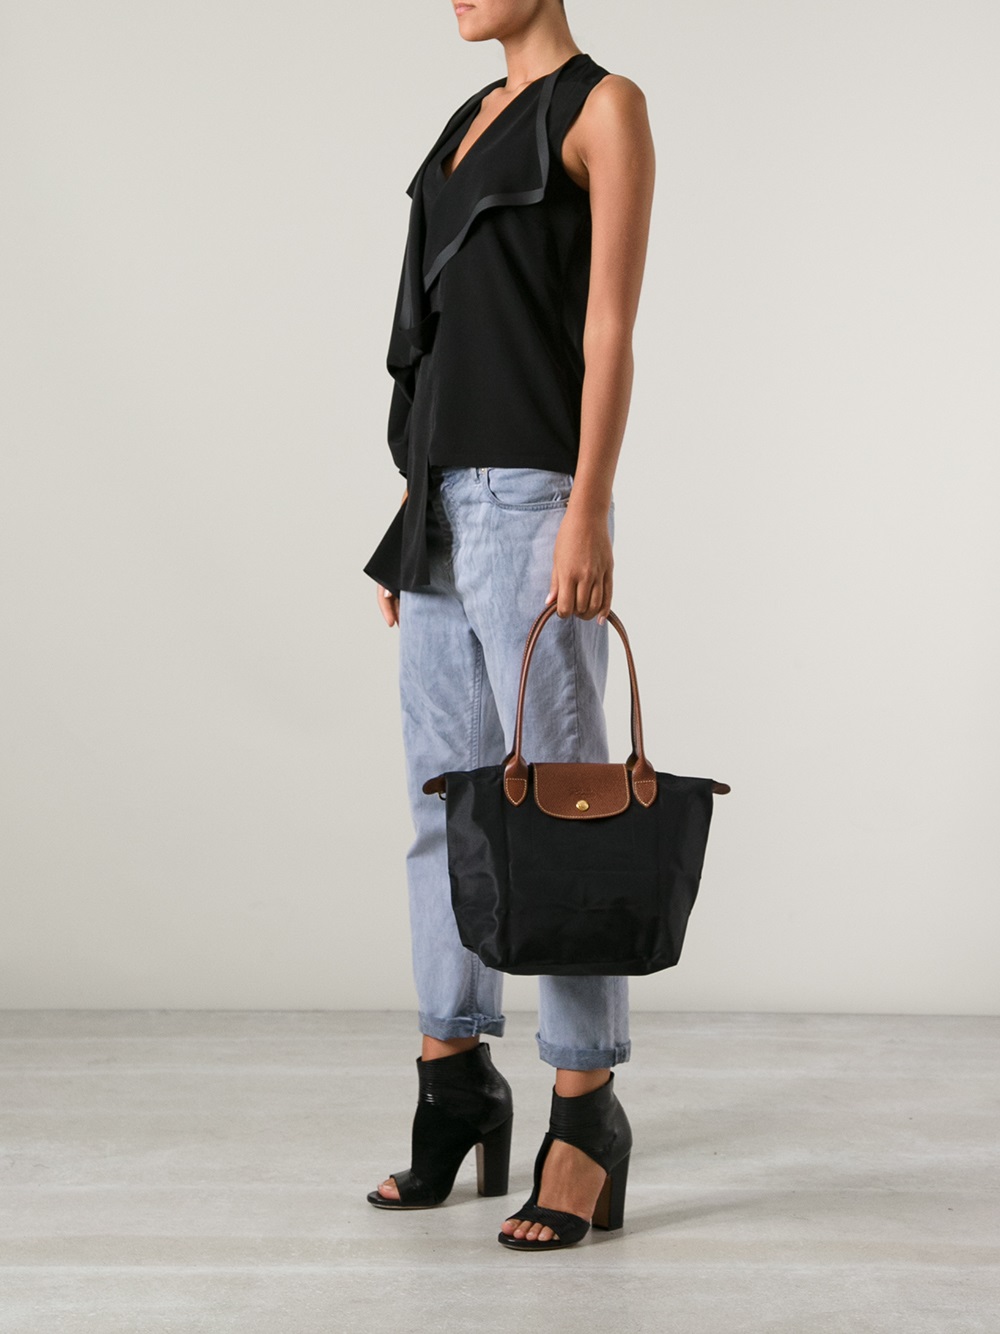 Longchamp Le Pliage Small Tote Top Sellers, 60% OFF 